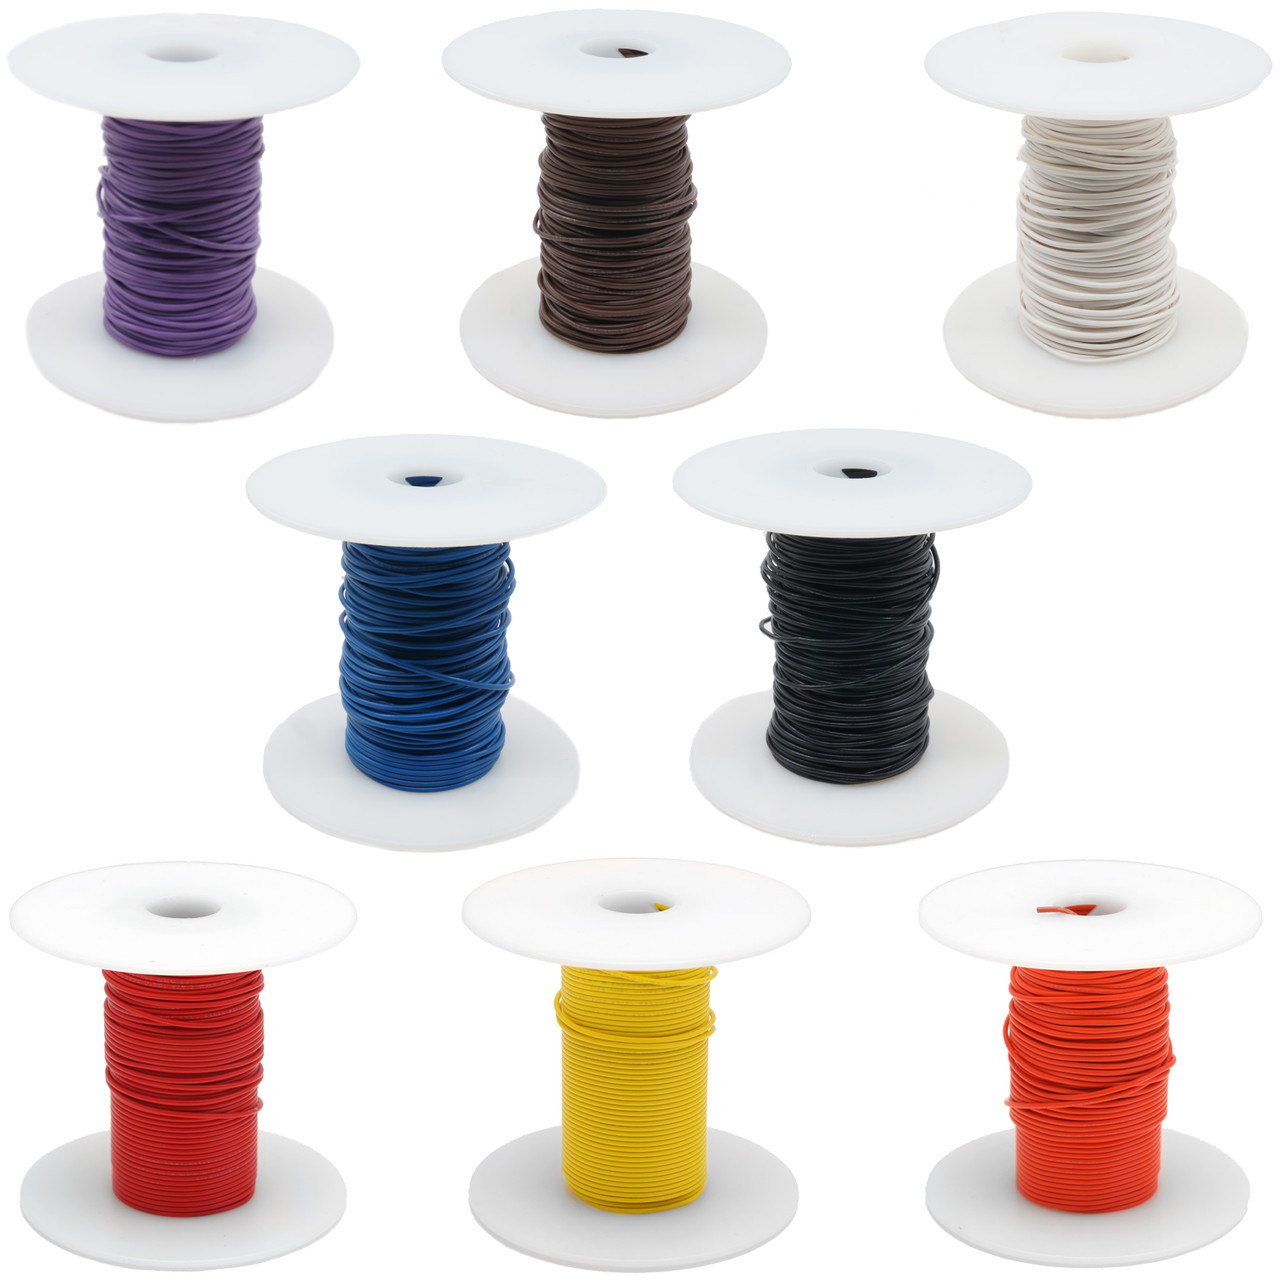 Hook-up Wire Kit 24 Gauge Stranded Wire, Six 100 Foot Spools